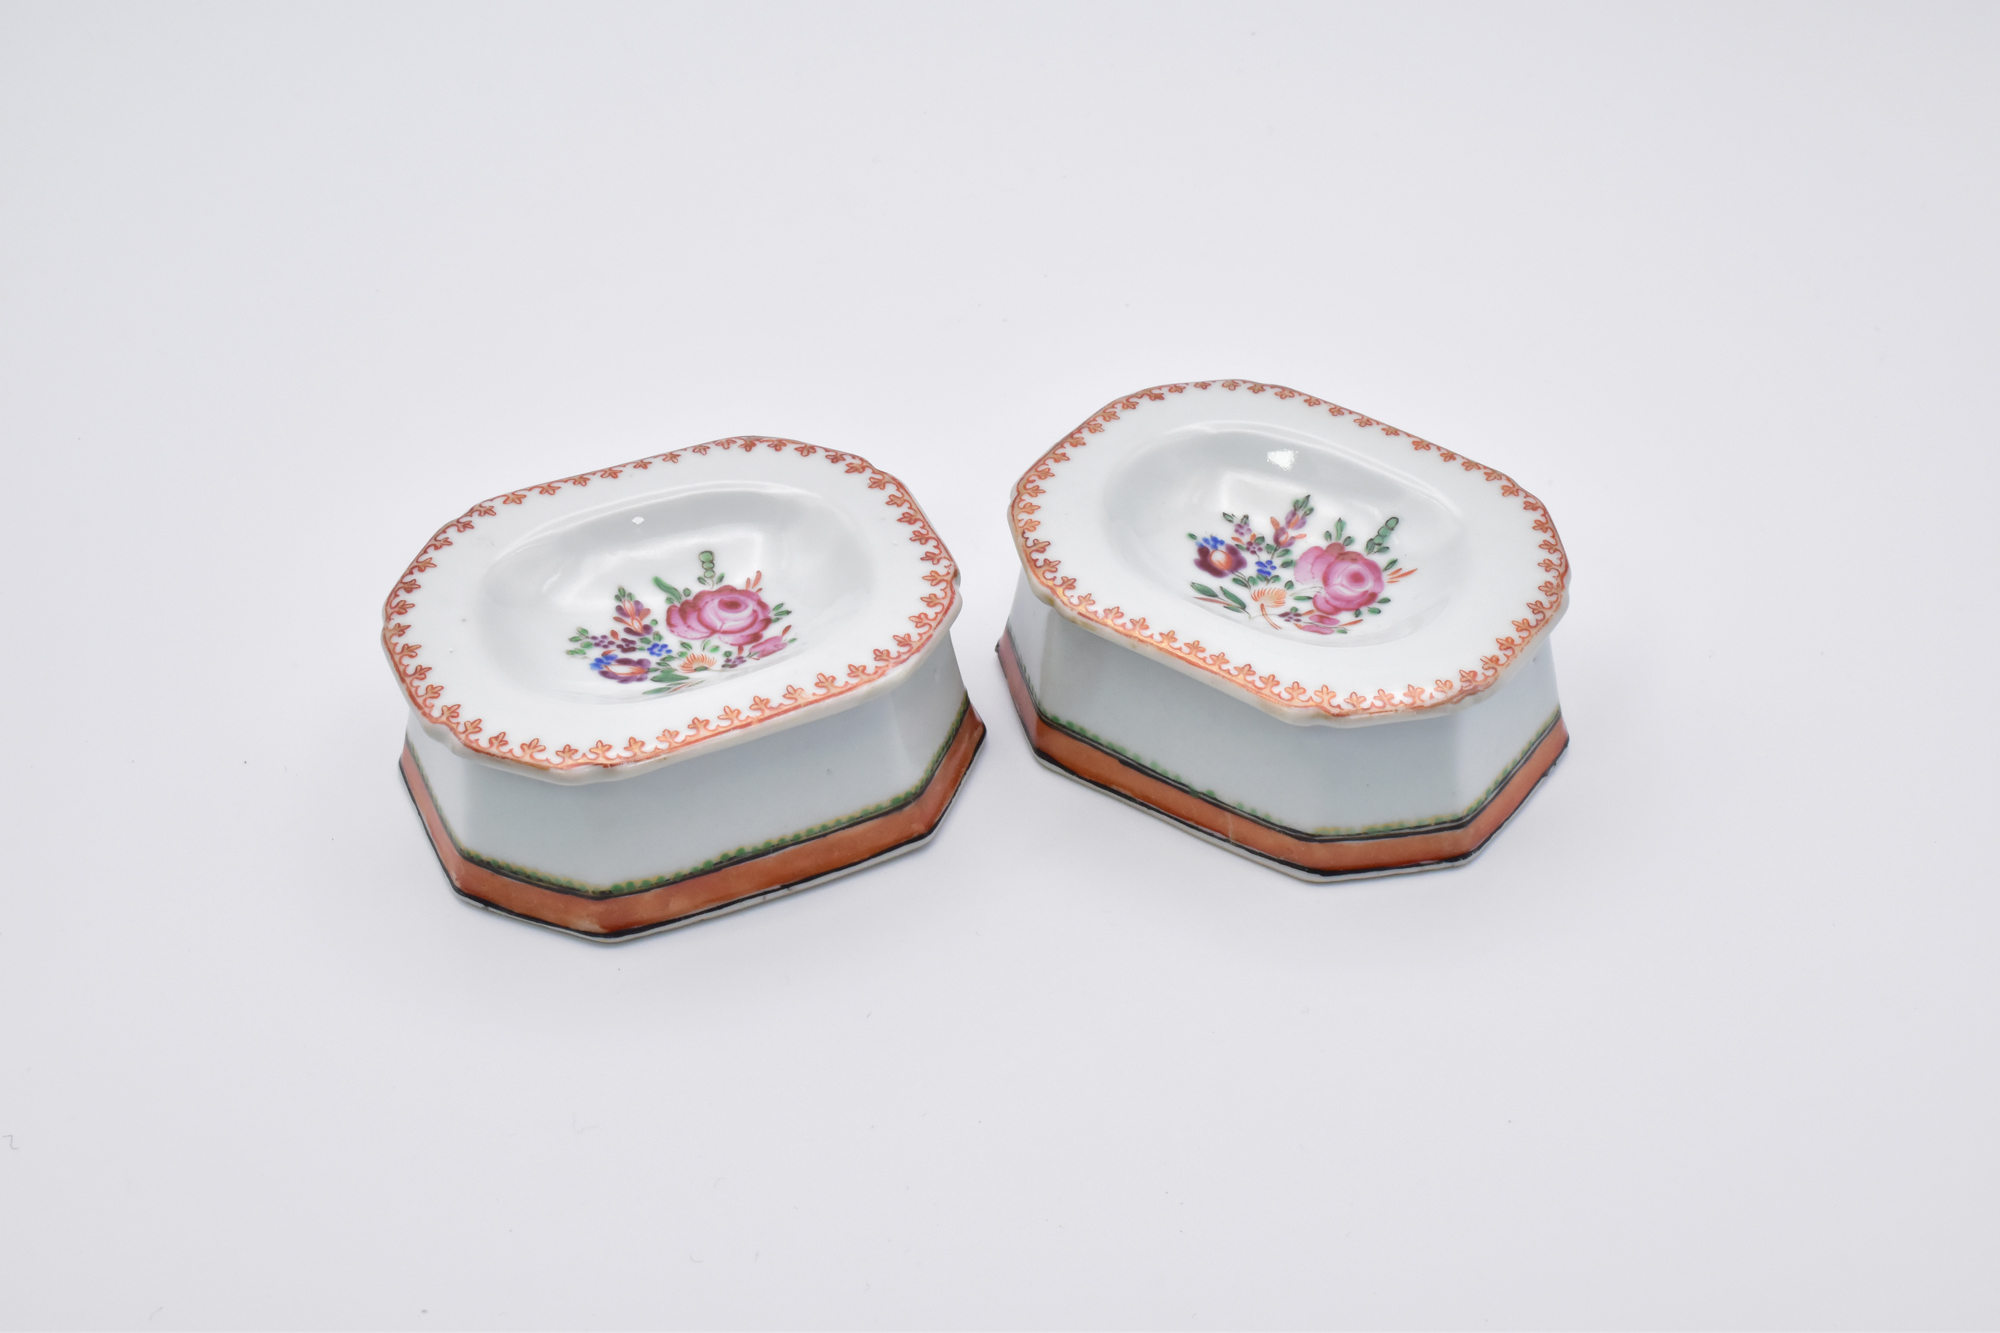 A PAIR OF CHINESE EXPORT ‘FAMILLE-ROSE’ PORCELAIN SALTS, QING DYNASTY, QIANLONG PERIOD, 1736 – 1795